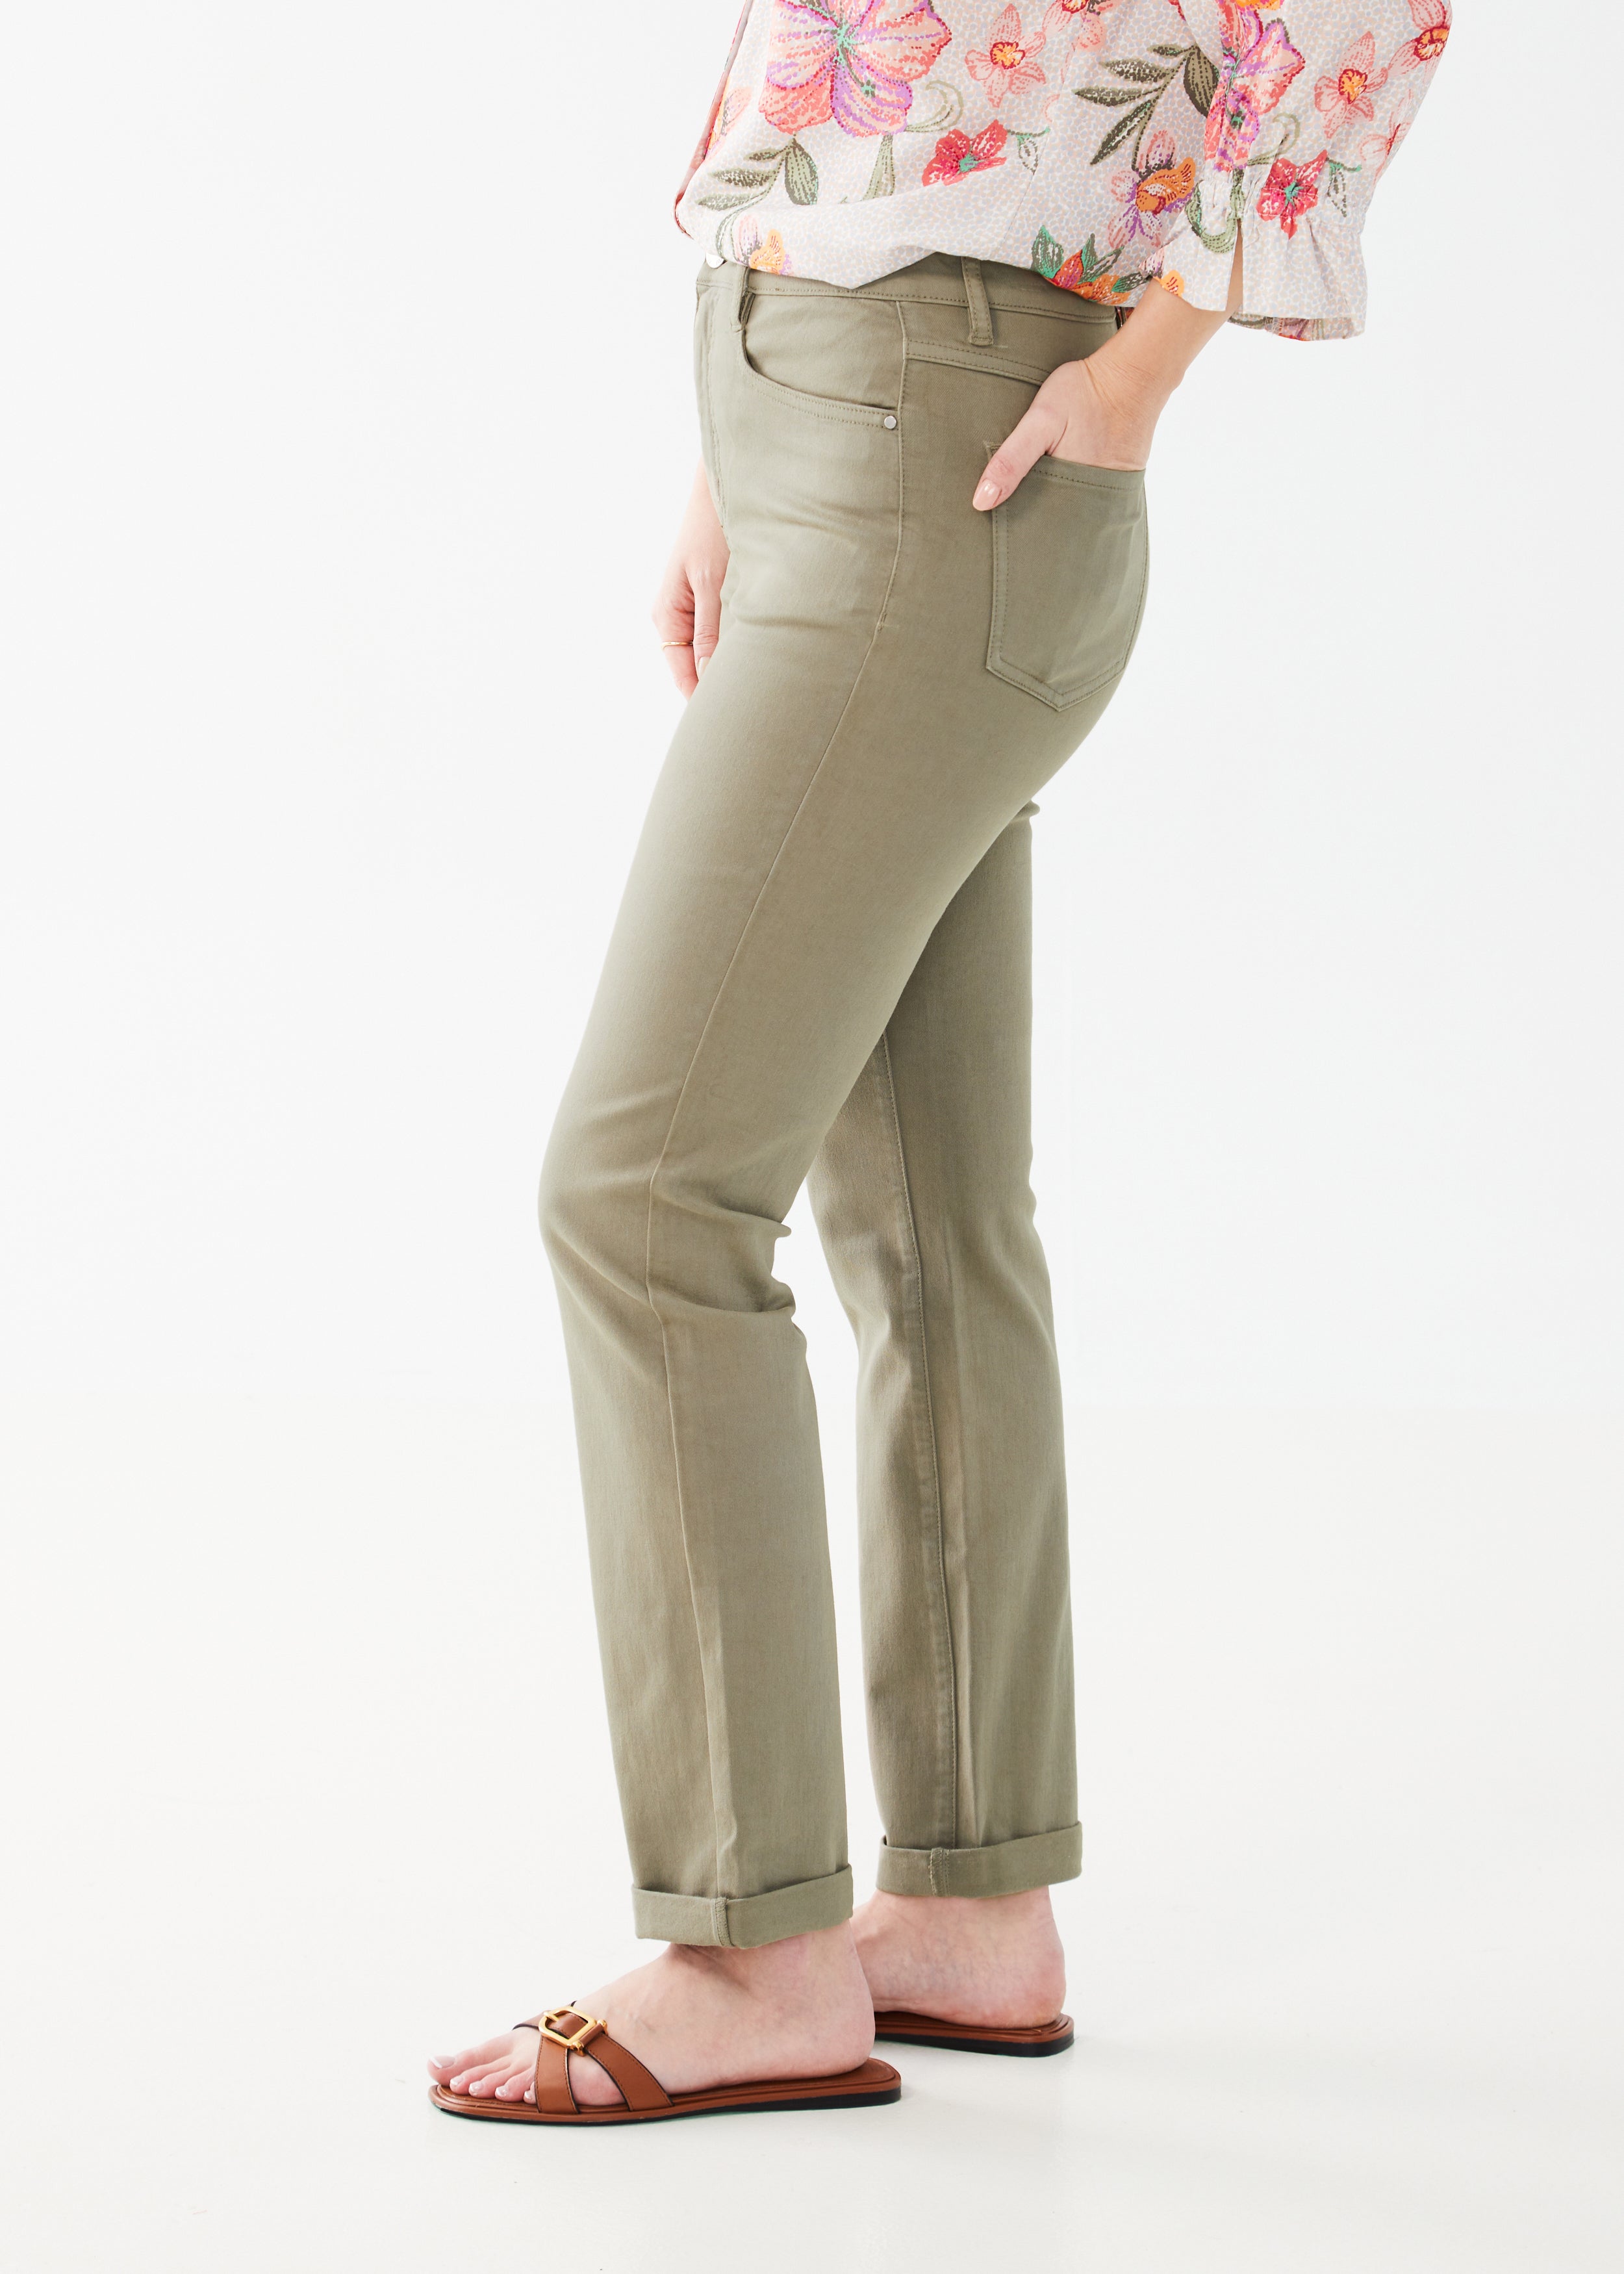 Introducing FDJ Suzanne Straight Leg jeans, featuring a flattering fit and versatile styling in Fern.